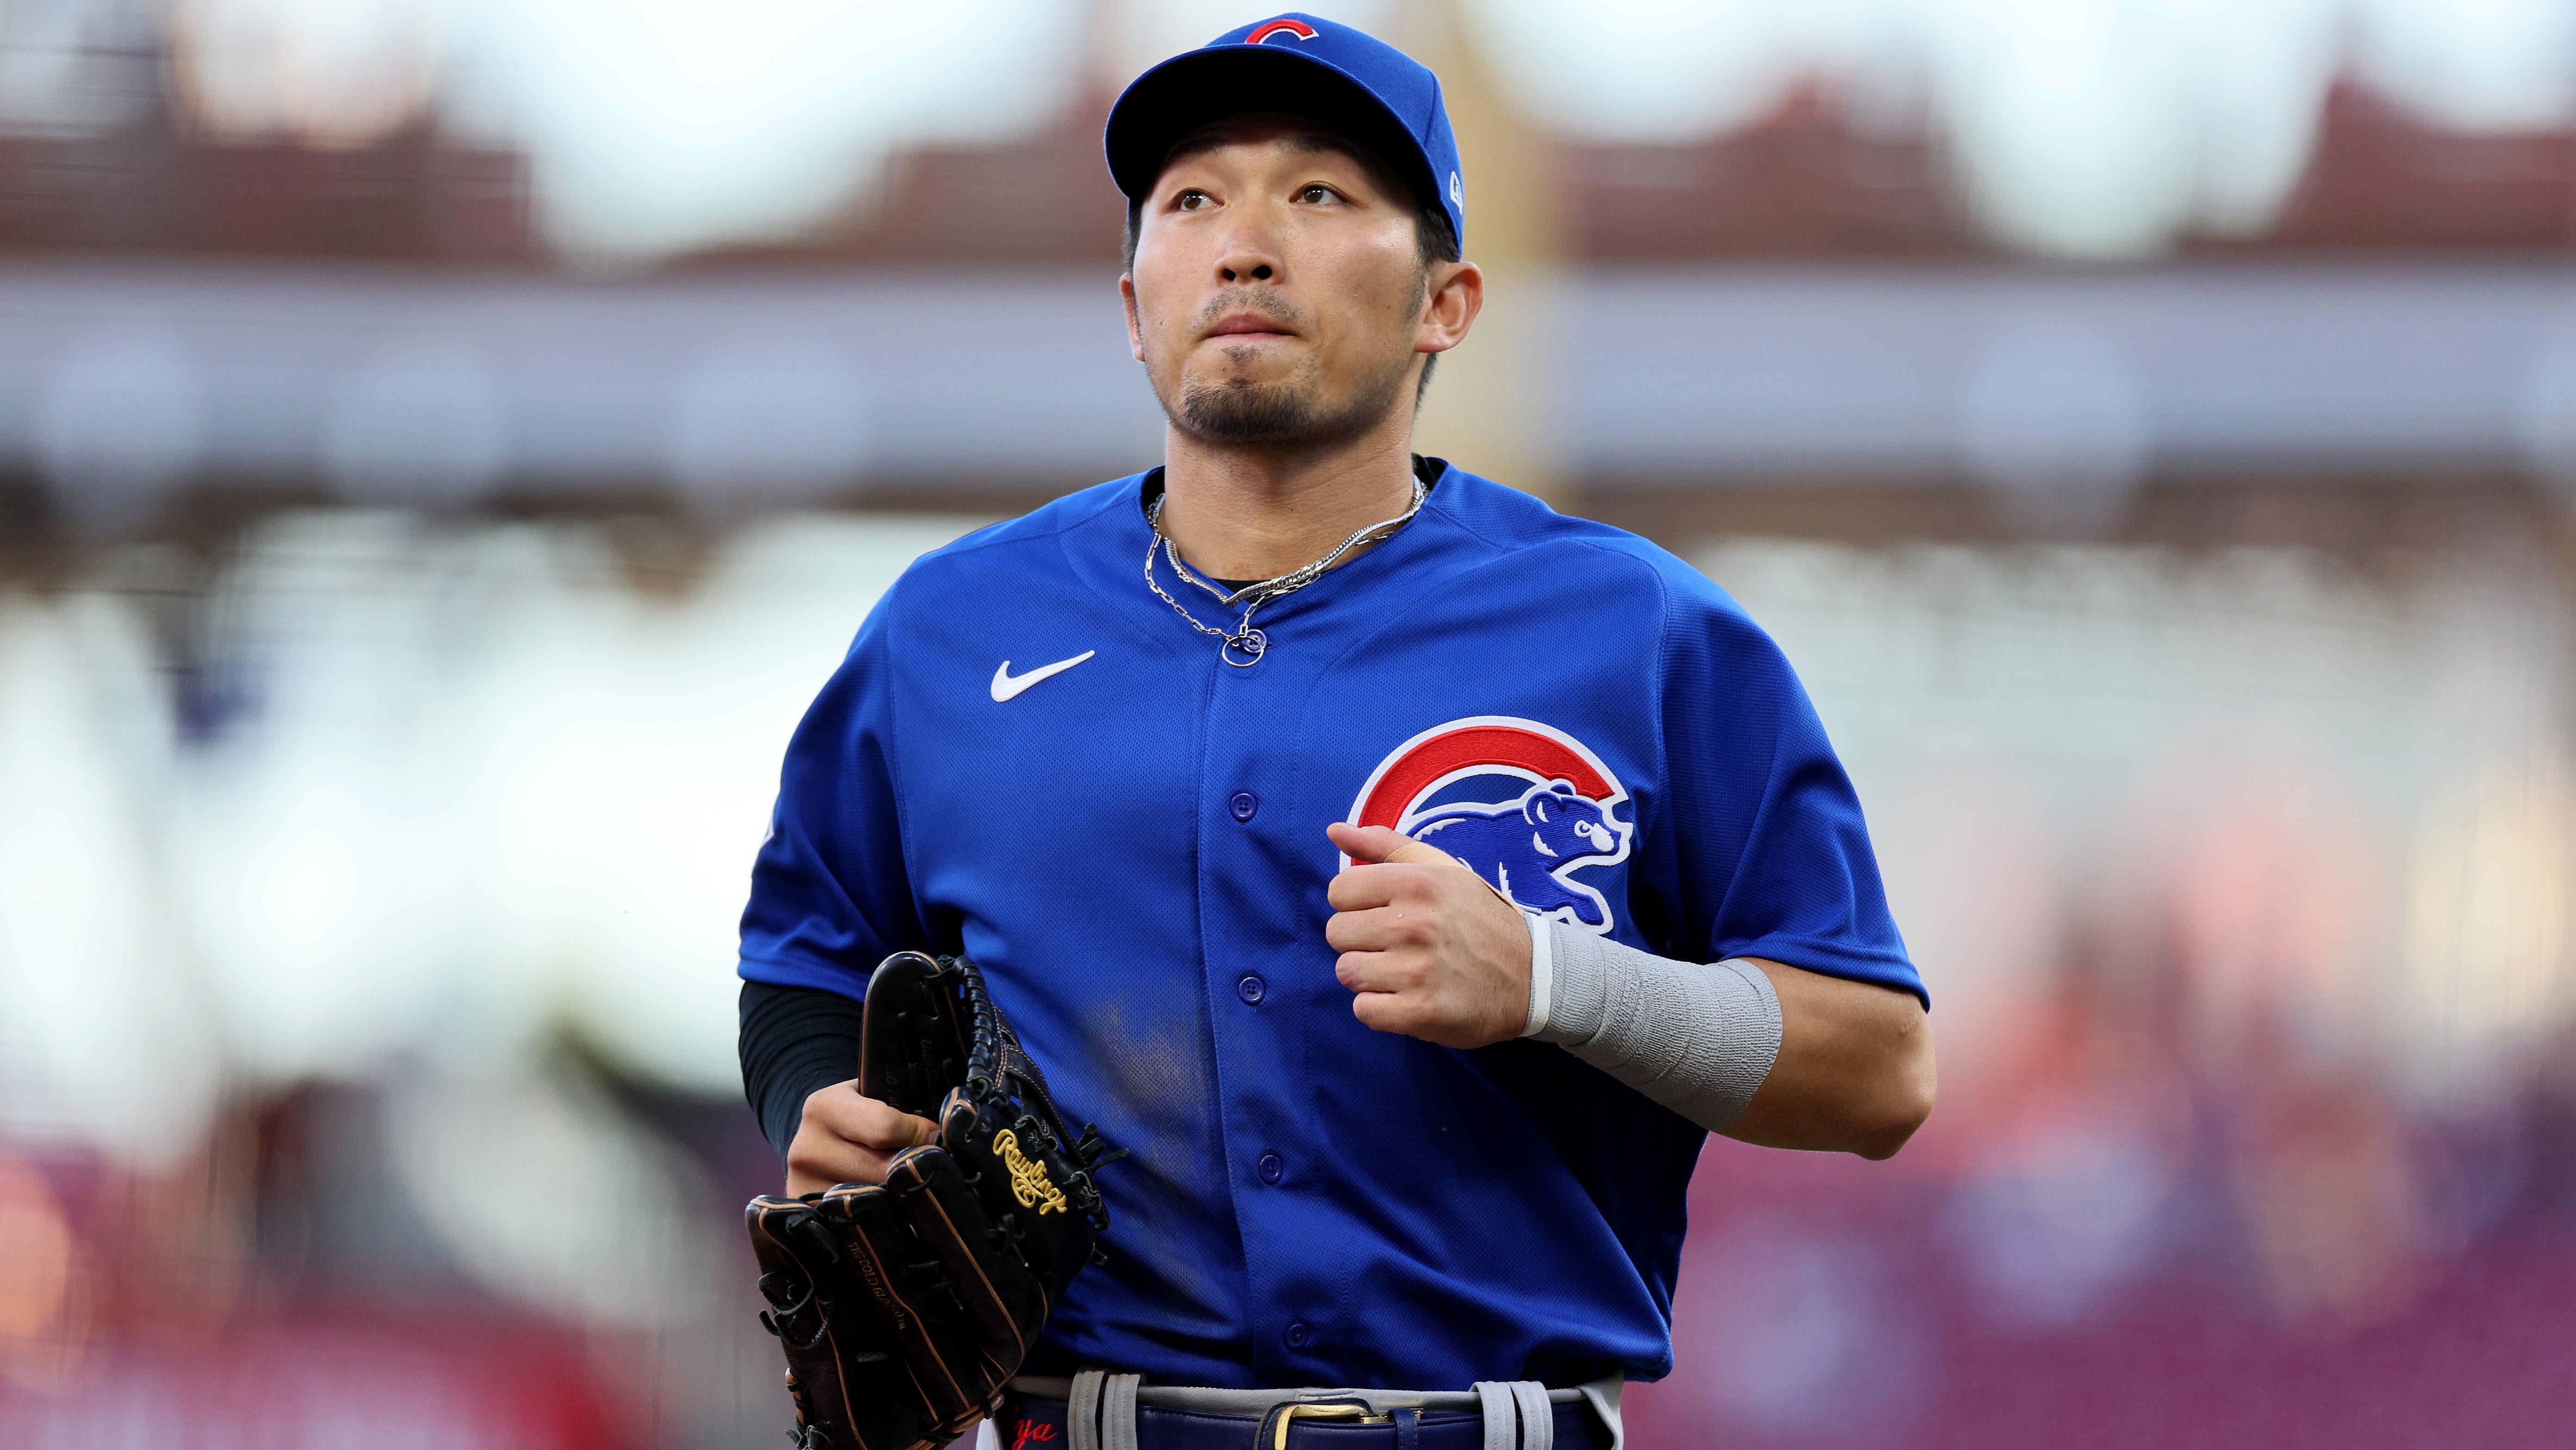 Cubs right fielder Seiya Suzuki withdraws from WBC as he deals with